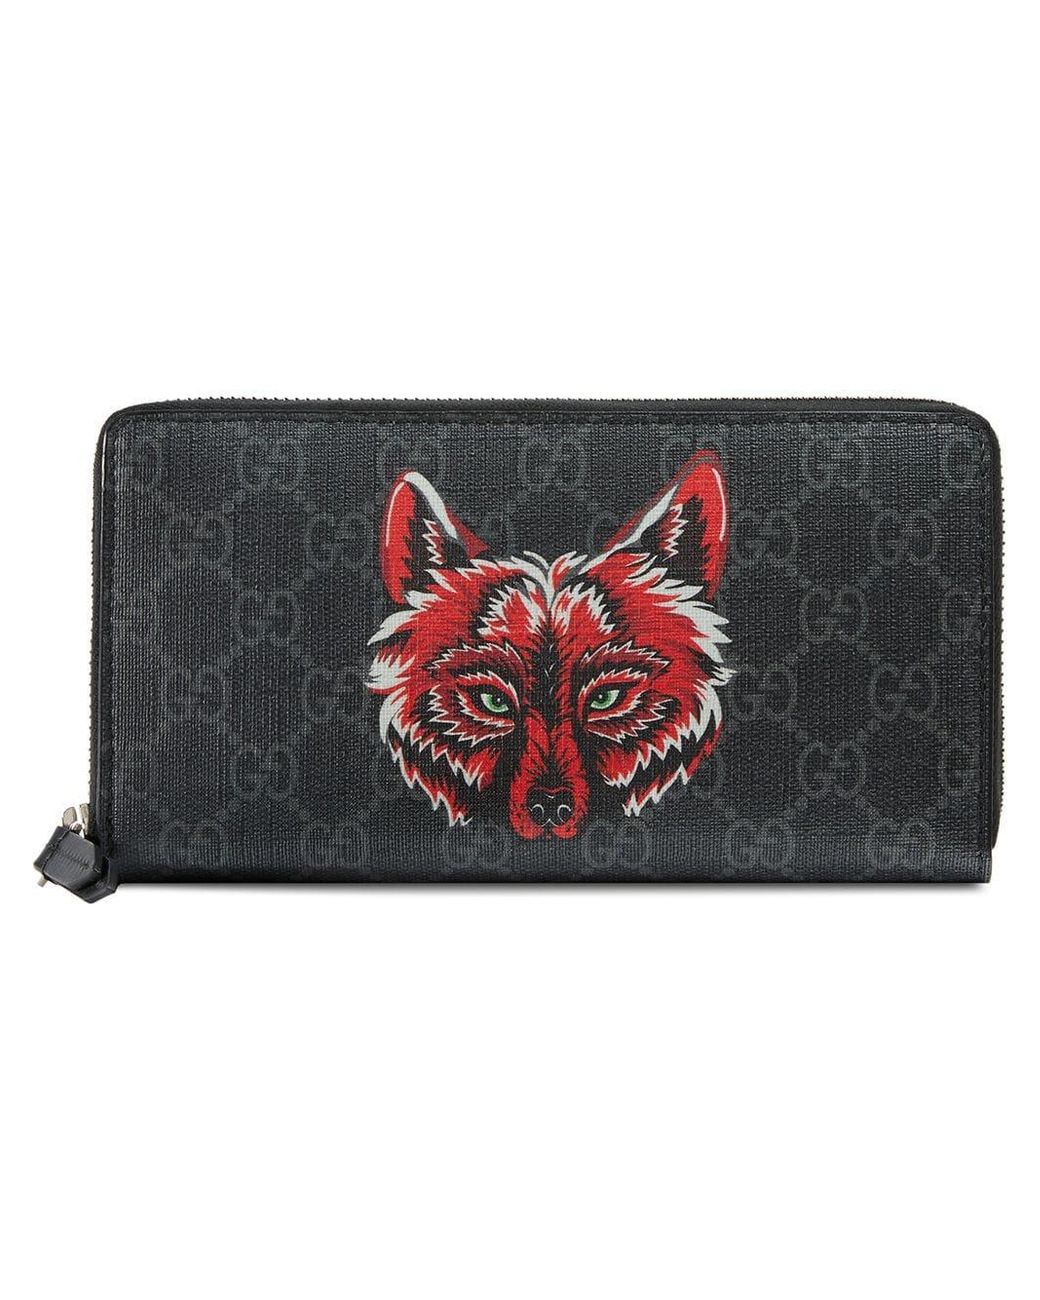 Gucci Leather Fox Print Wallet in Black for Men | Lyst